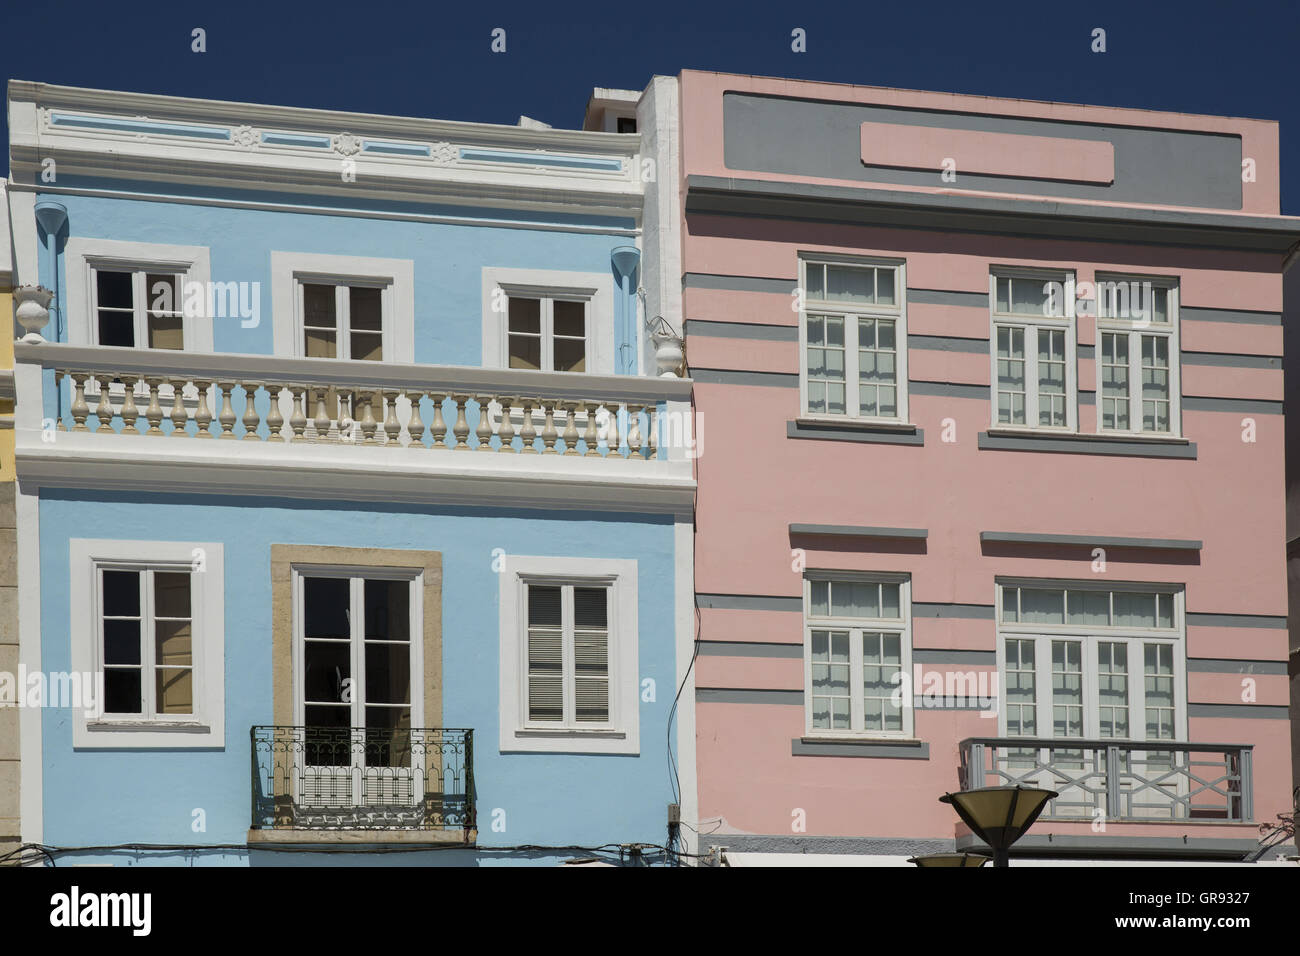 Two Houses With Balconies In Portugal, Europe Stock Photo